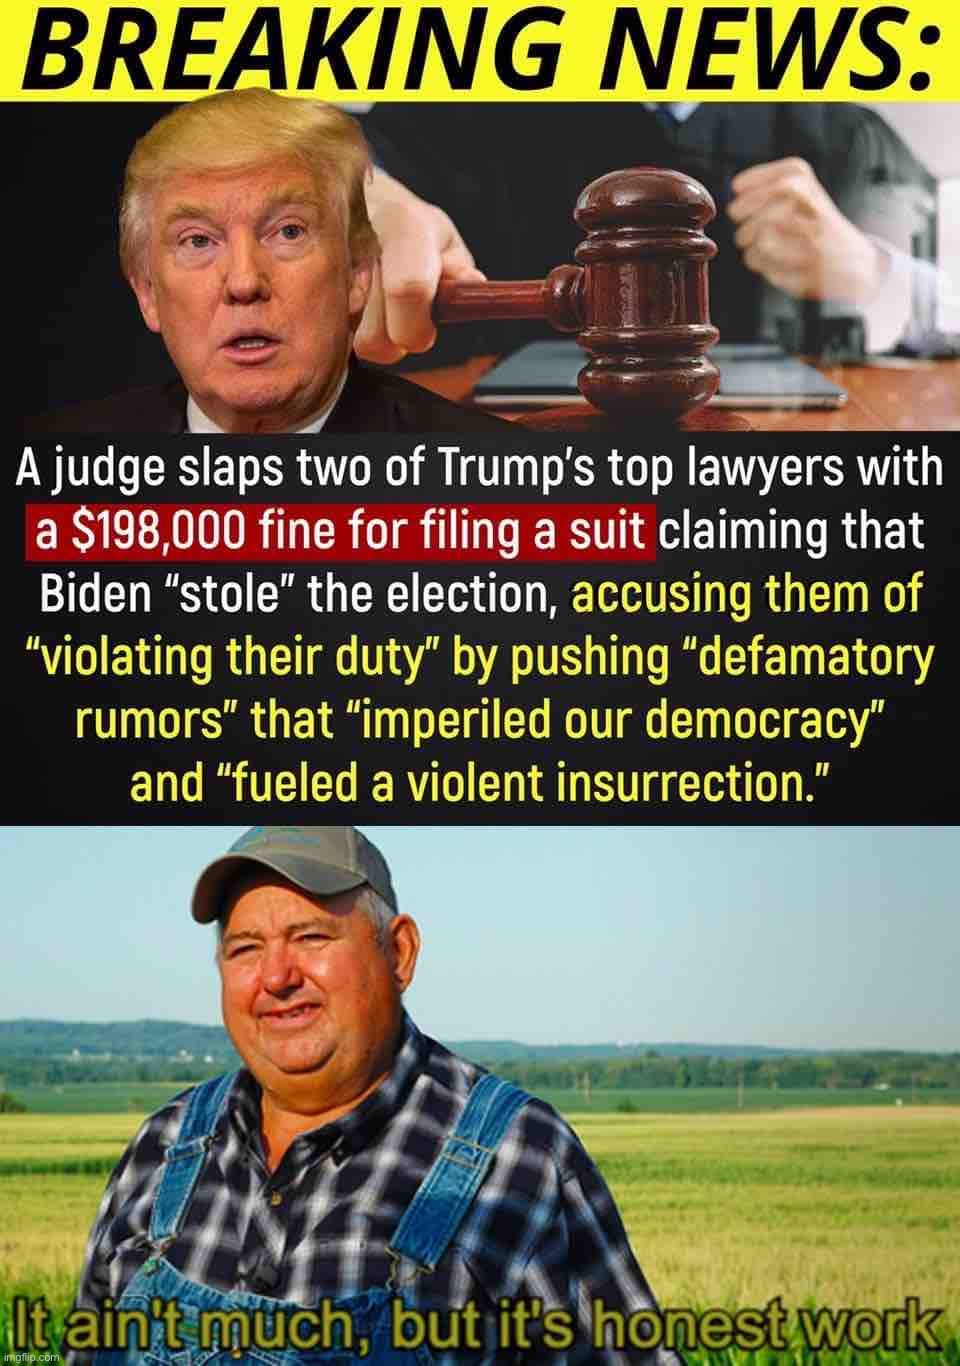 Perhaps disbarment and jail time would have been better, but oh well, we’ll take it | image tagged in judge fines trump lawyers,it ain't much but it's honest work,election 2020,lawyers,lawyer,election fraud | made w/ Imgflip meme maker